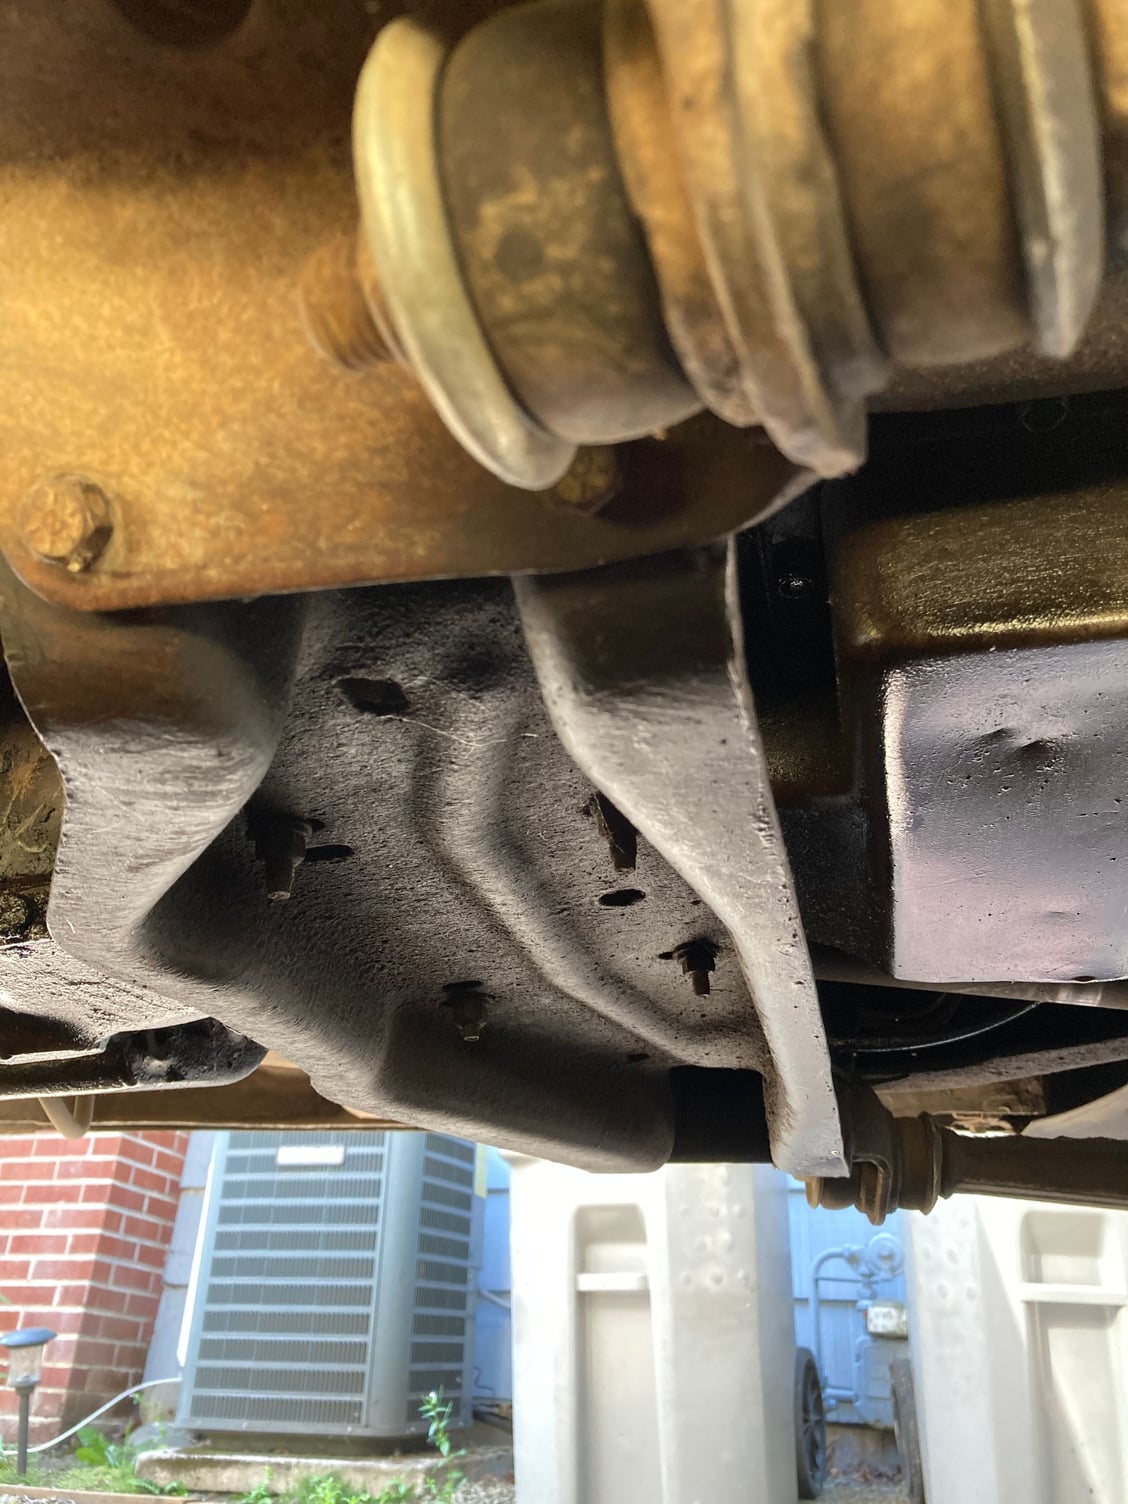 Hit a snag changing trans fluid on C6 - Ford Truck Enthusiasts Forums 1988 Ford C6 Transmission Fluid Type